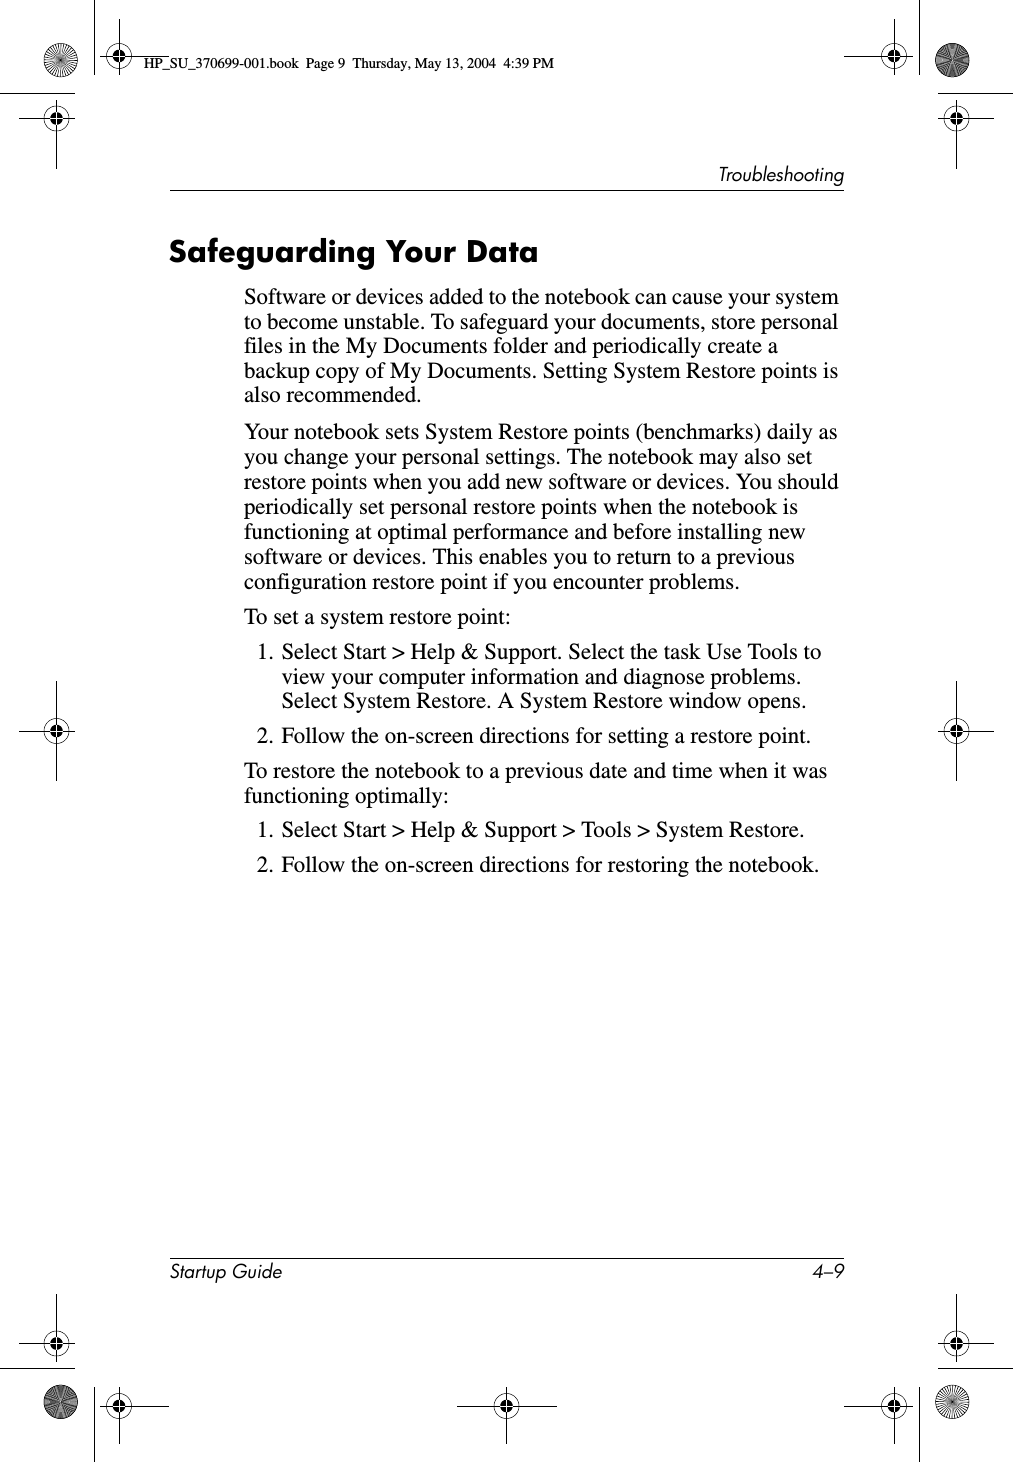 TroubleshootingStartup Guide 4–9Safeguarding Your DataSoftware or devices added to the notebook can cause your system to become unstable. To safeguard your documents, store personal files in the My Documents folder and periodically create a backup copy of My Documents. Setting System Restore points is also recommended.Your notebook sets System Restore points (benchmarks) daily as you change your personal settings. The notebook may also set restore points when you add new software or devices. You should periodically set personal restore points when the notebook is functioning at optimal performance and before installing new software or devices. This enables you to return to a previous configuration restore point if you encounter problems.To set a system restore point:1. Select Start &gt; Help &amp; Support. Select the task Use Tools to view your computer information and diagnose problems. Select System Restore. A System Restore window opens.2. Follow the on-screen directions for setting a restore point.To restore the notebook to a previous date and time when it was functioning optimally:1. Select Start &gt; Help &amp; Support &gt; Tools &gt; System Restore.2. Follow the on-screen directions for restoring the notebook. HP_SU_370699-001.book  Page 9  Thursday, May 13, 2004  4:39 PM